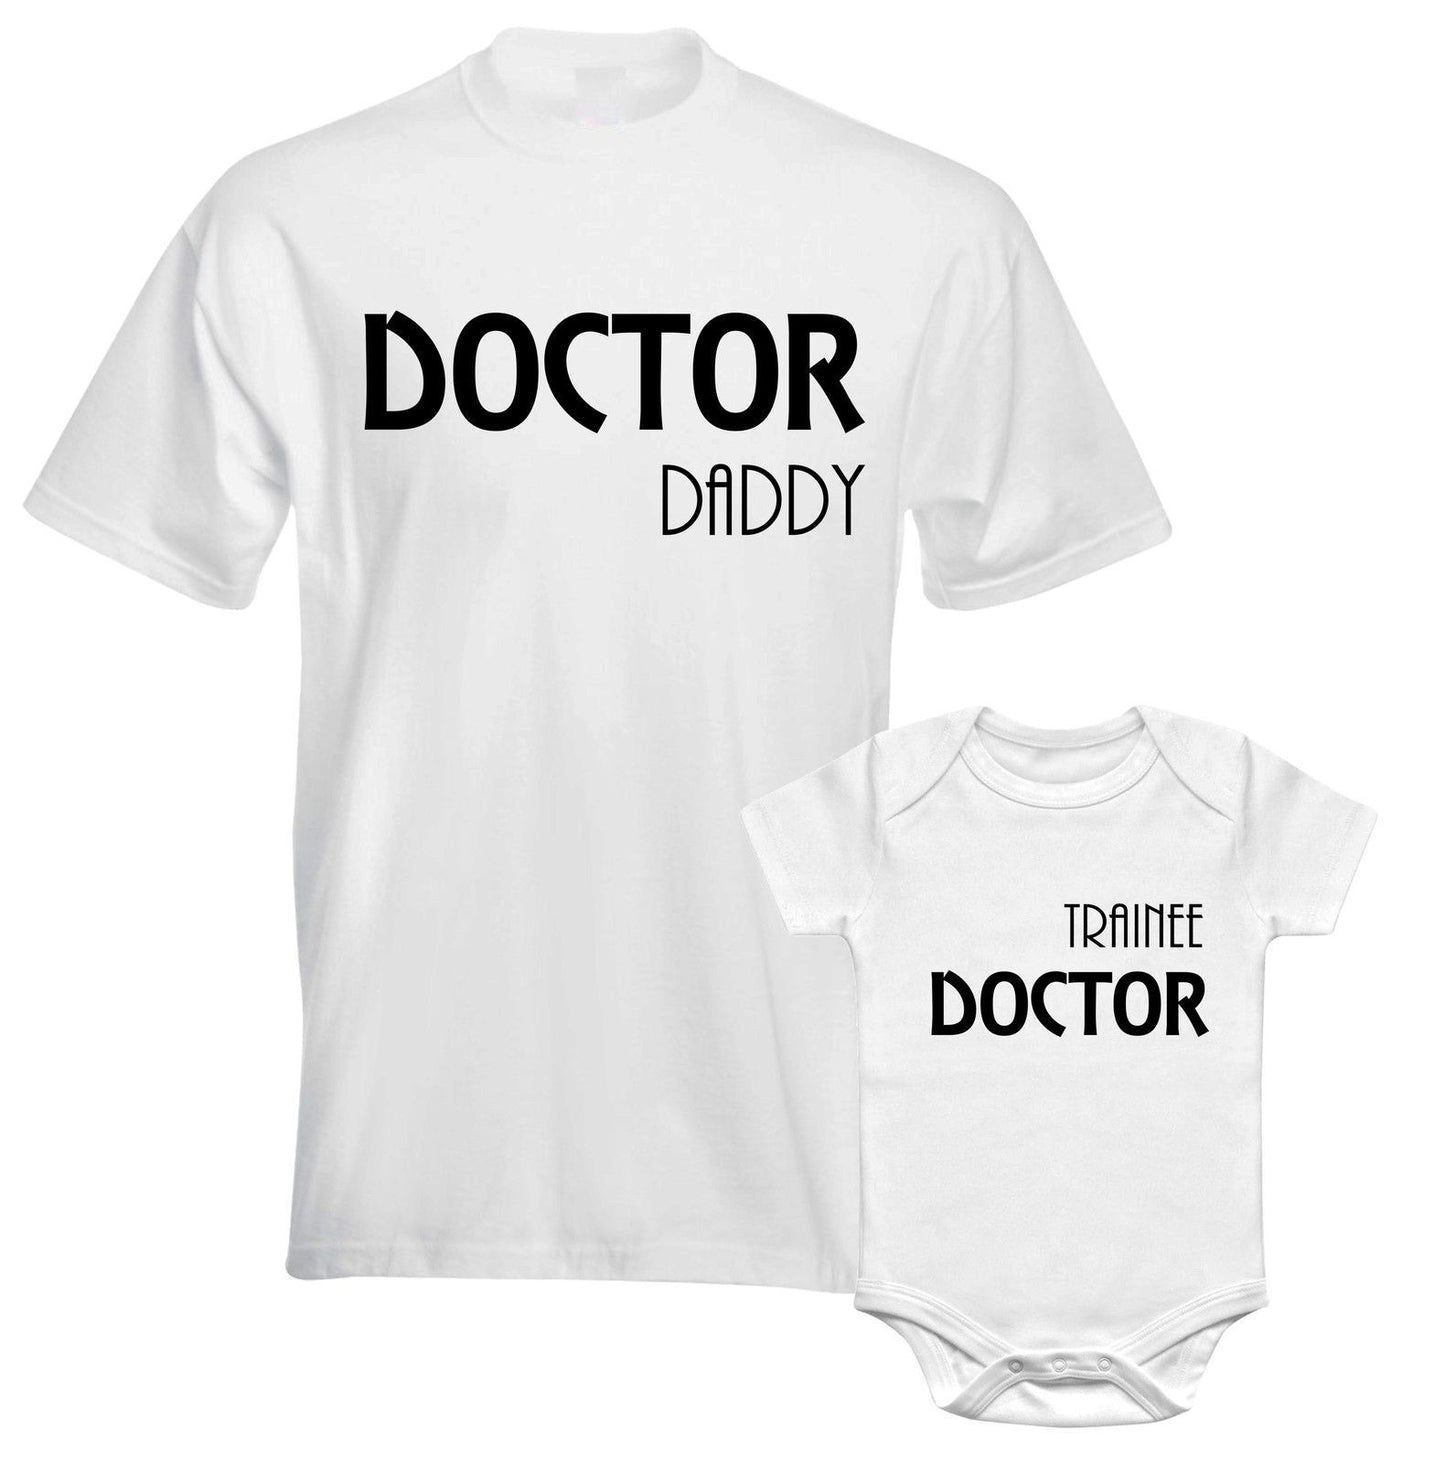 Father Daddy Daughter Dad Son Matching T shirts Doctor Daddy Trainee Doctor